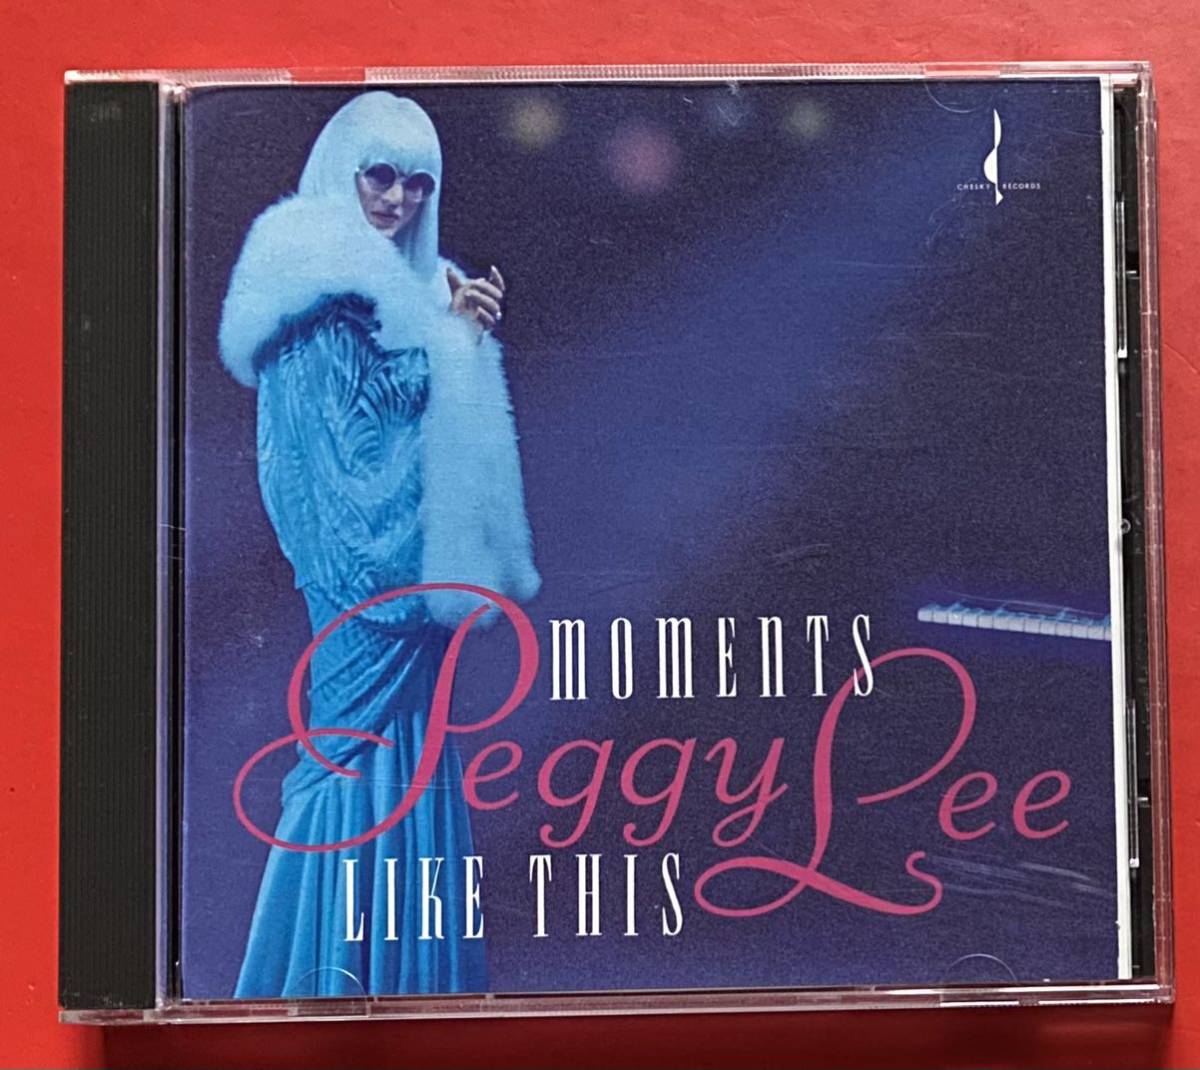 【CD】ペギー・リー「MOMENTS LIKE THIS」PEGGY LEE 国内盤 [09280330]_画像1